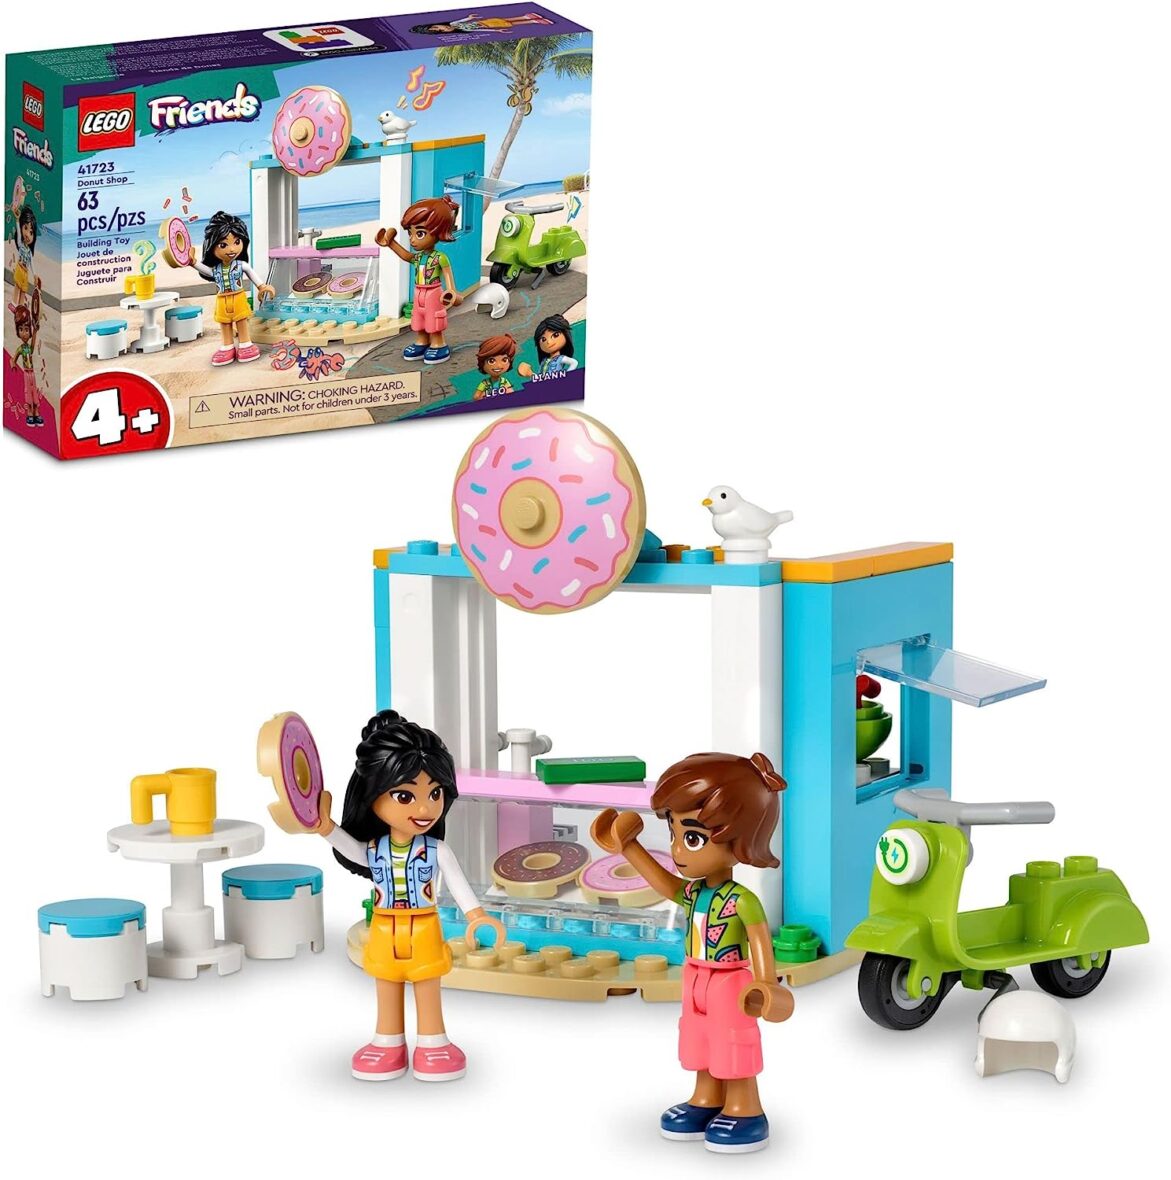 LEGO Friends Donut Shop 41723, Food Playset, Bakery Toy for Girls and Boys 4 Plus Years Old, Includes Liann and Leo Mini-Dolls and Toy Scooter